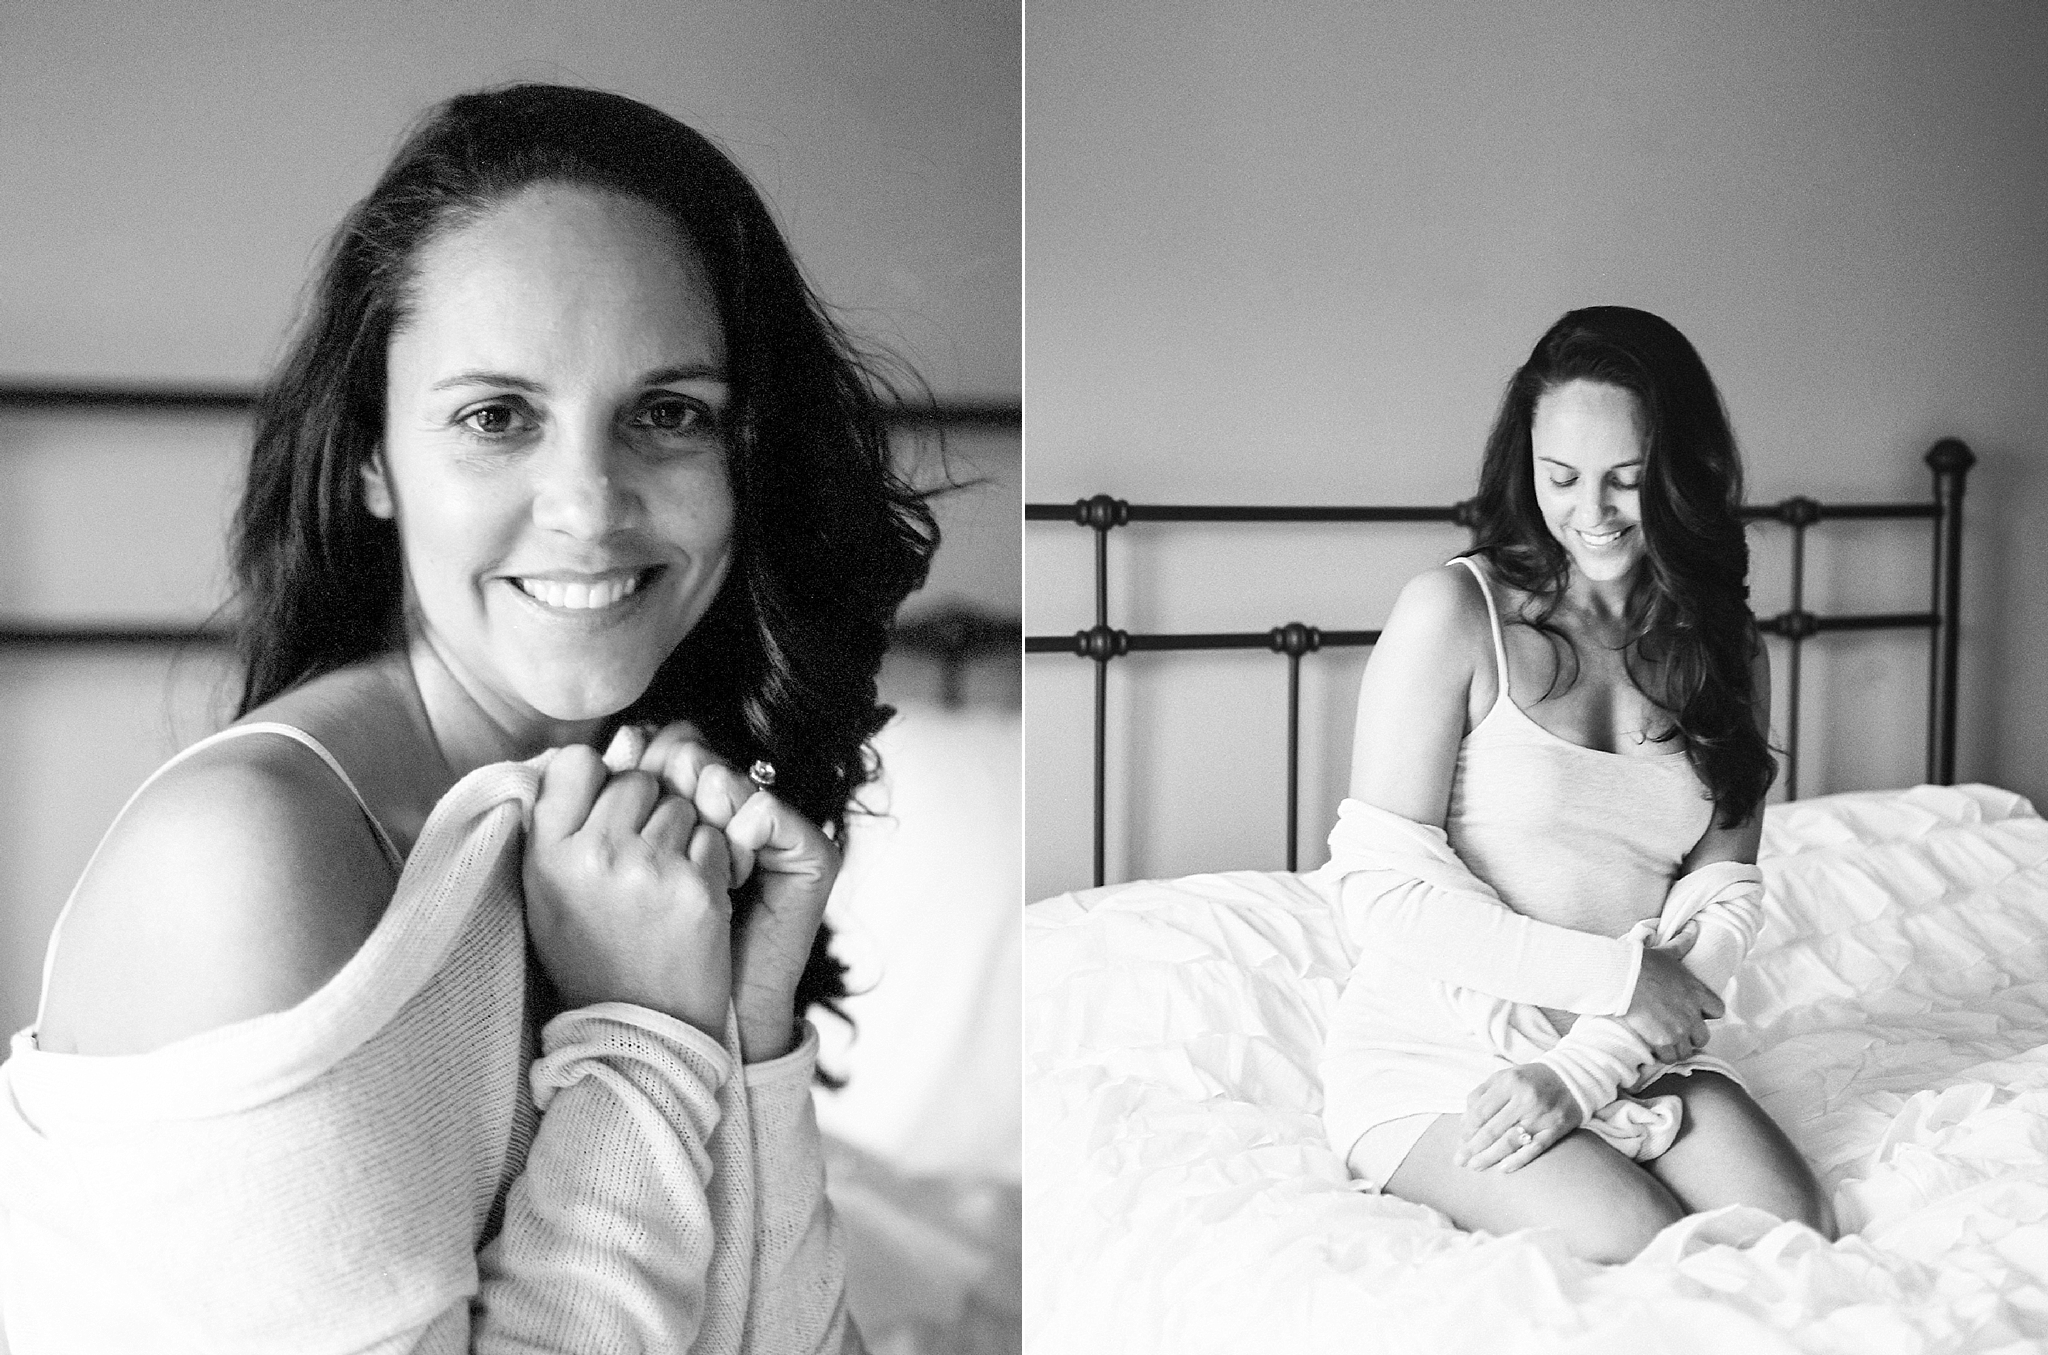 Alicia Lacey, a Washington, DC wedding photographer, promotes self-confidence and inner beauty through black and white film photos for The Portrait Project.